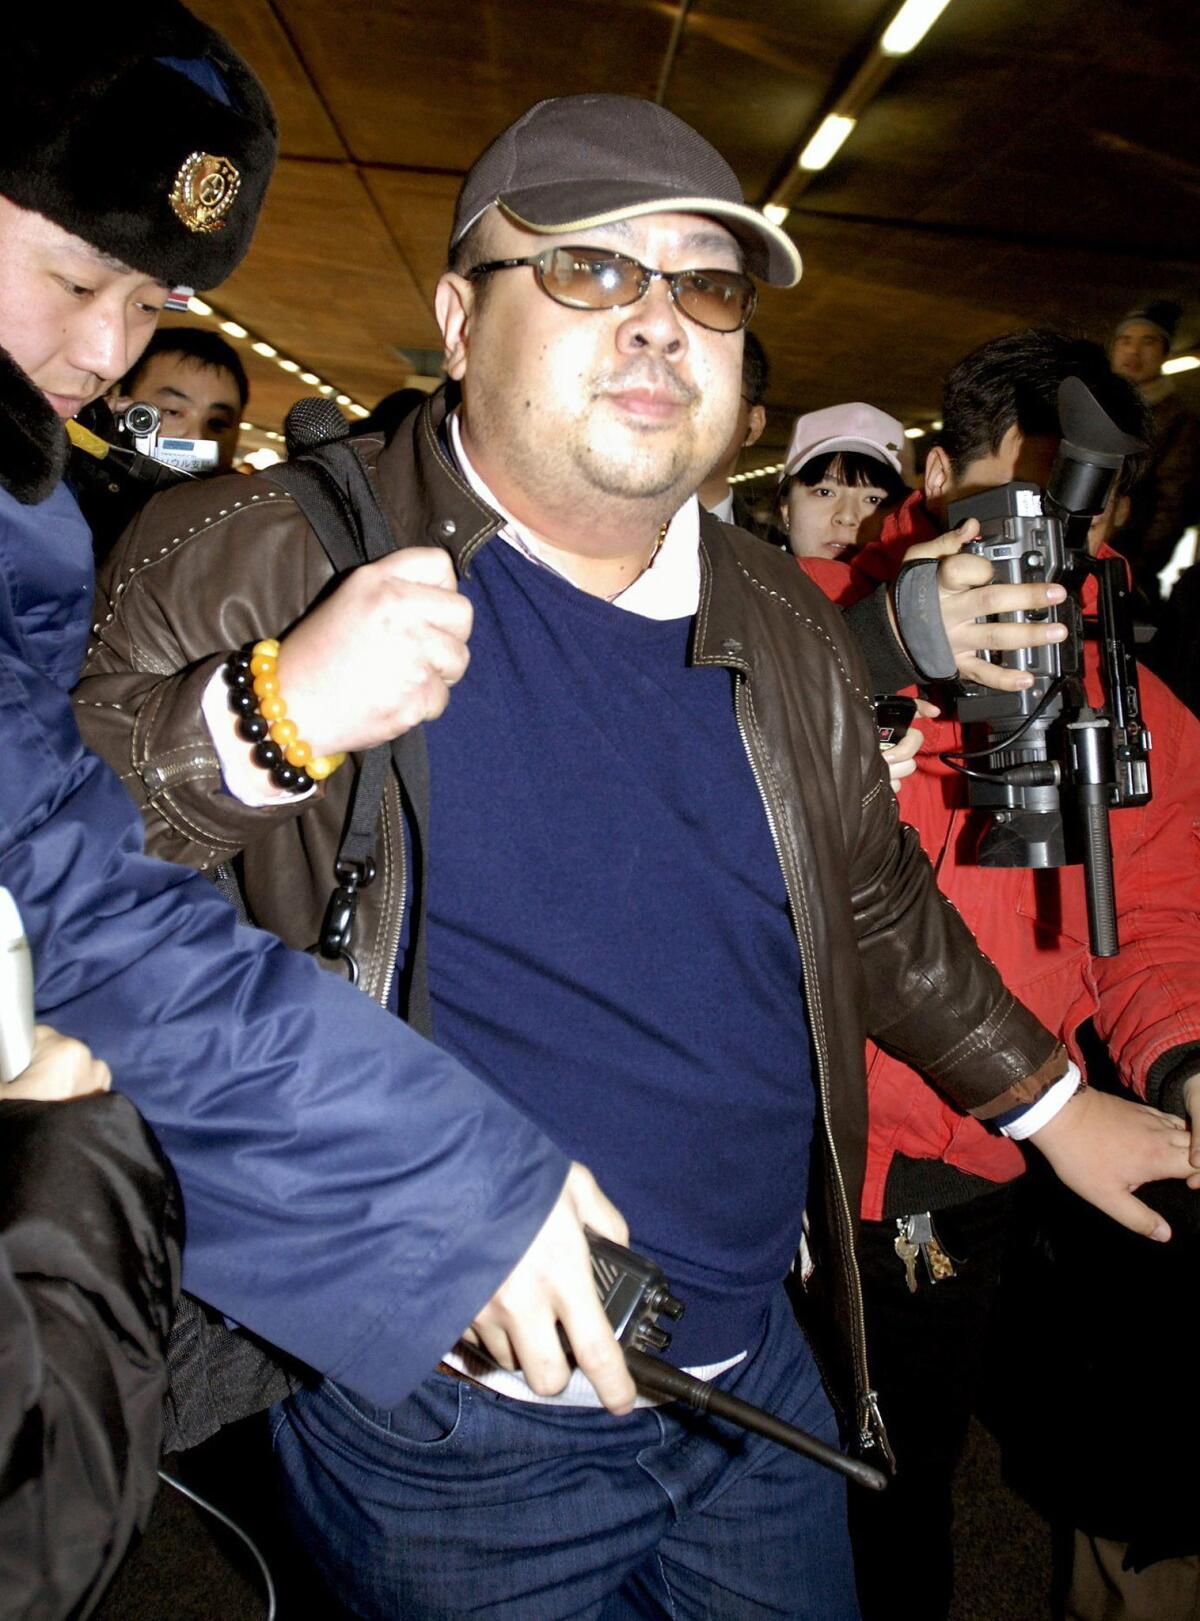 A man believed to be North Korean leader Kim Jong Un's brother, Kim Jong Nam, walks among journalists upon his arrival at the Beijing airport on Feb. 11, 2007.